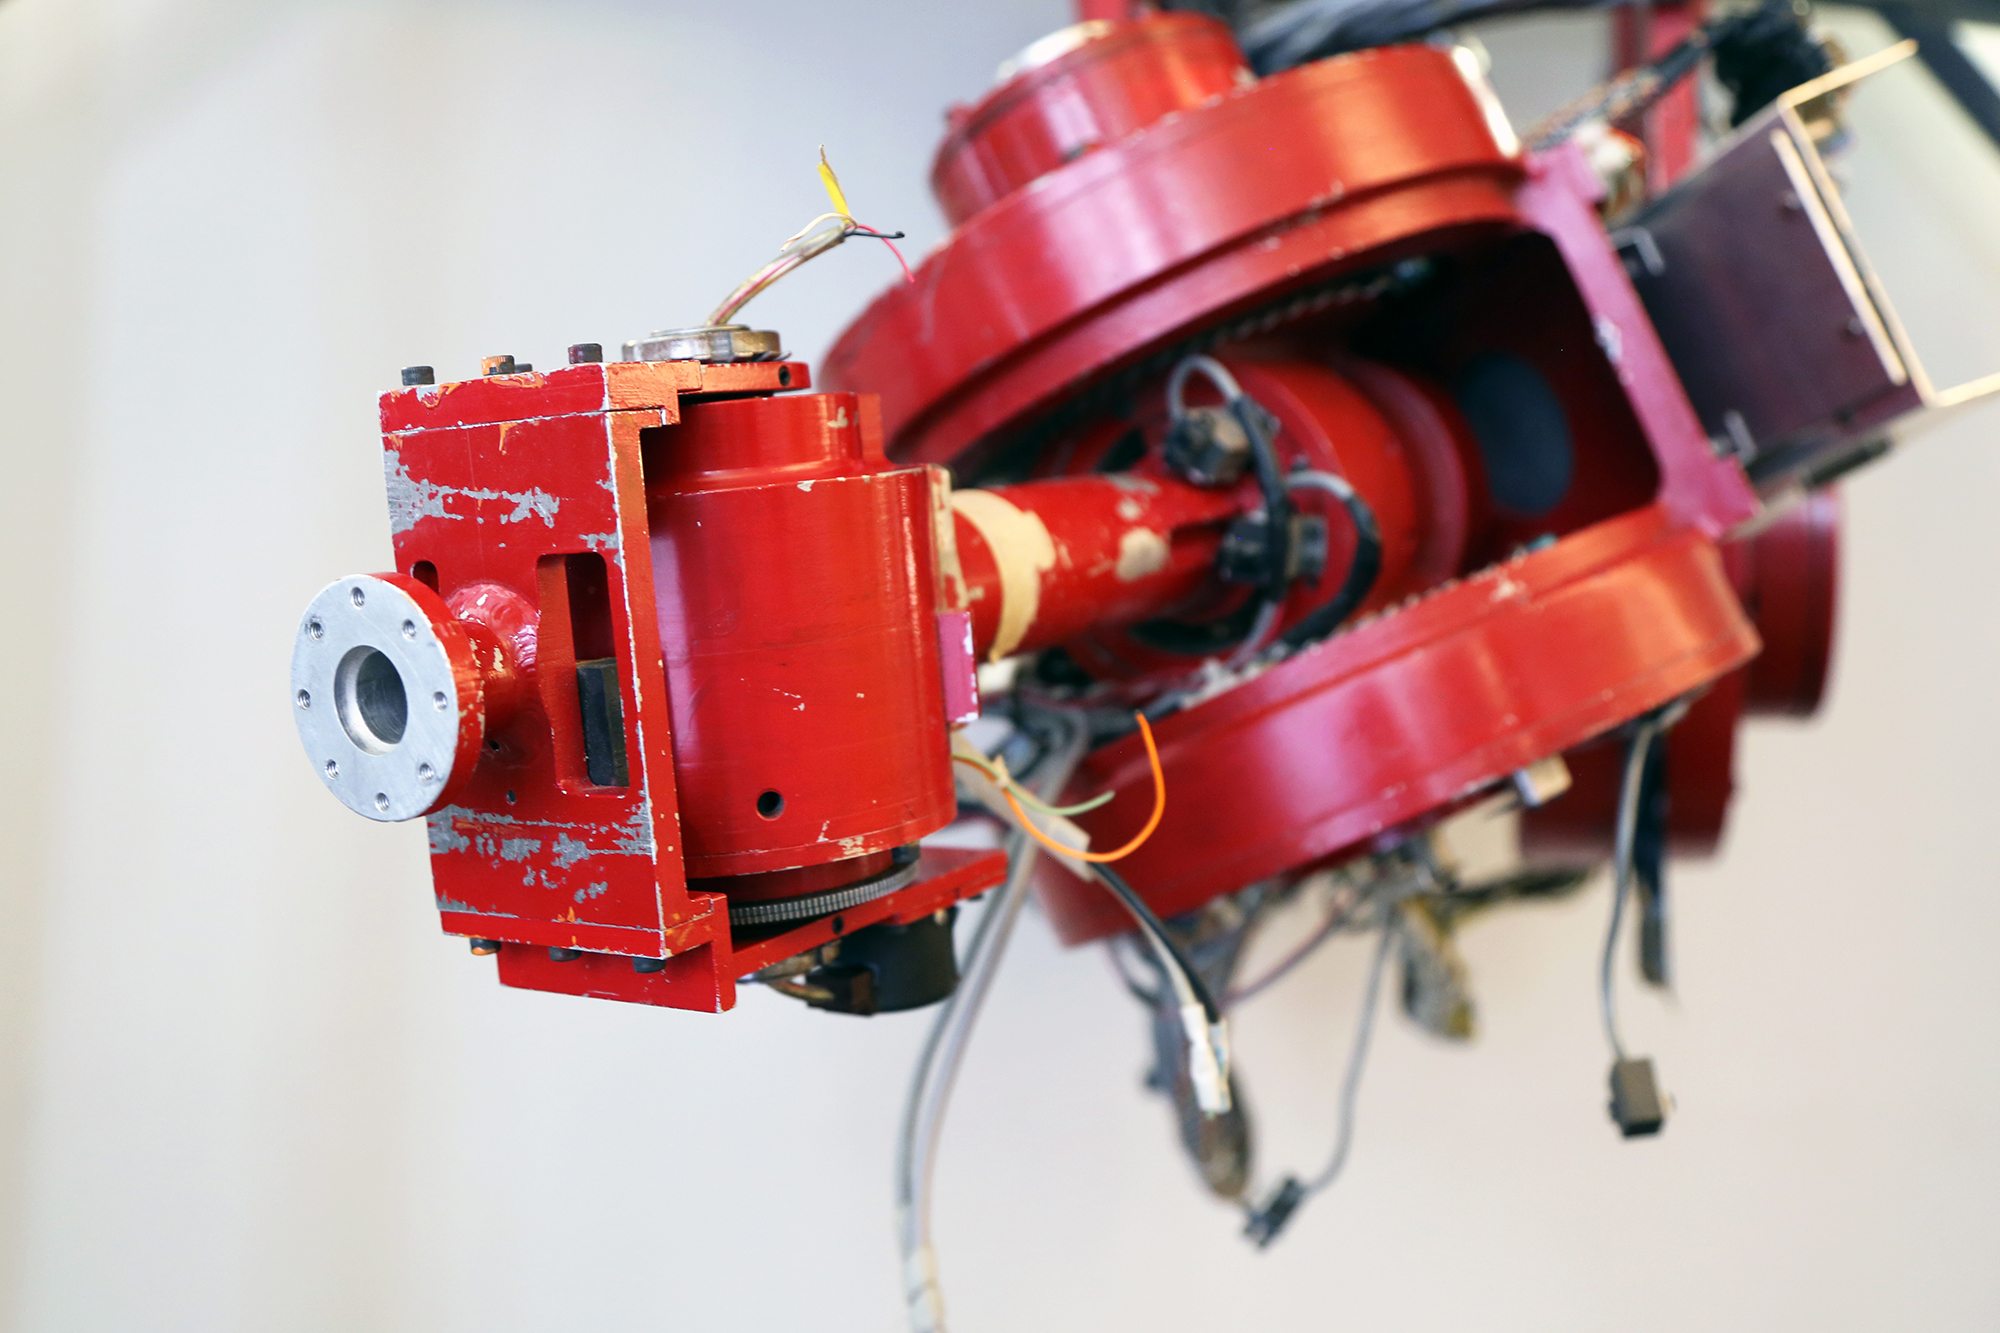 A close-up view of the Direct Drive Arm I, created at Carnegie Mellon University in 1982 by Dr. Takeo Kanade and Dr. Harry Asada. From the Christopher G. Atkeson Collection, Carnegie Mellon University Archives.